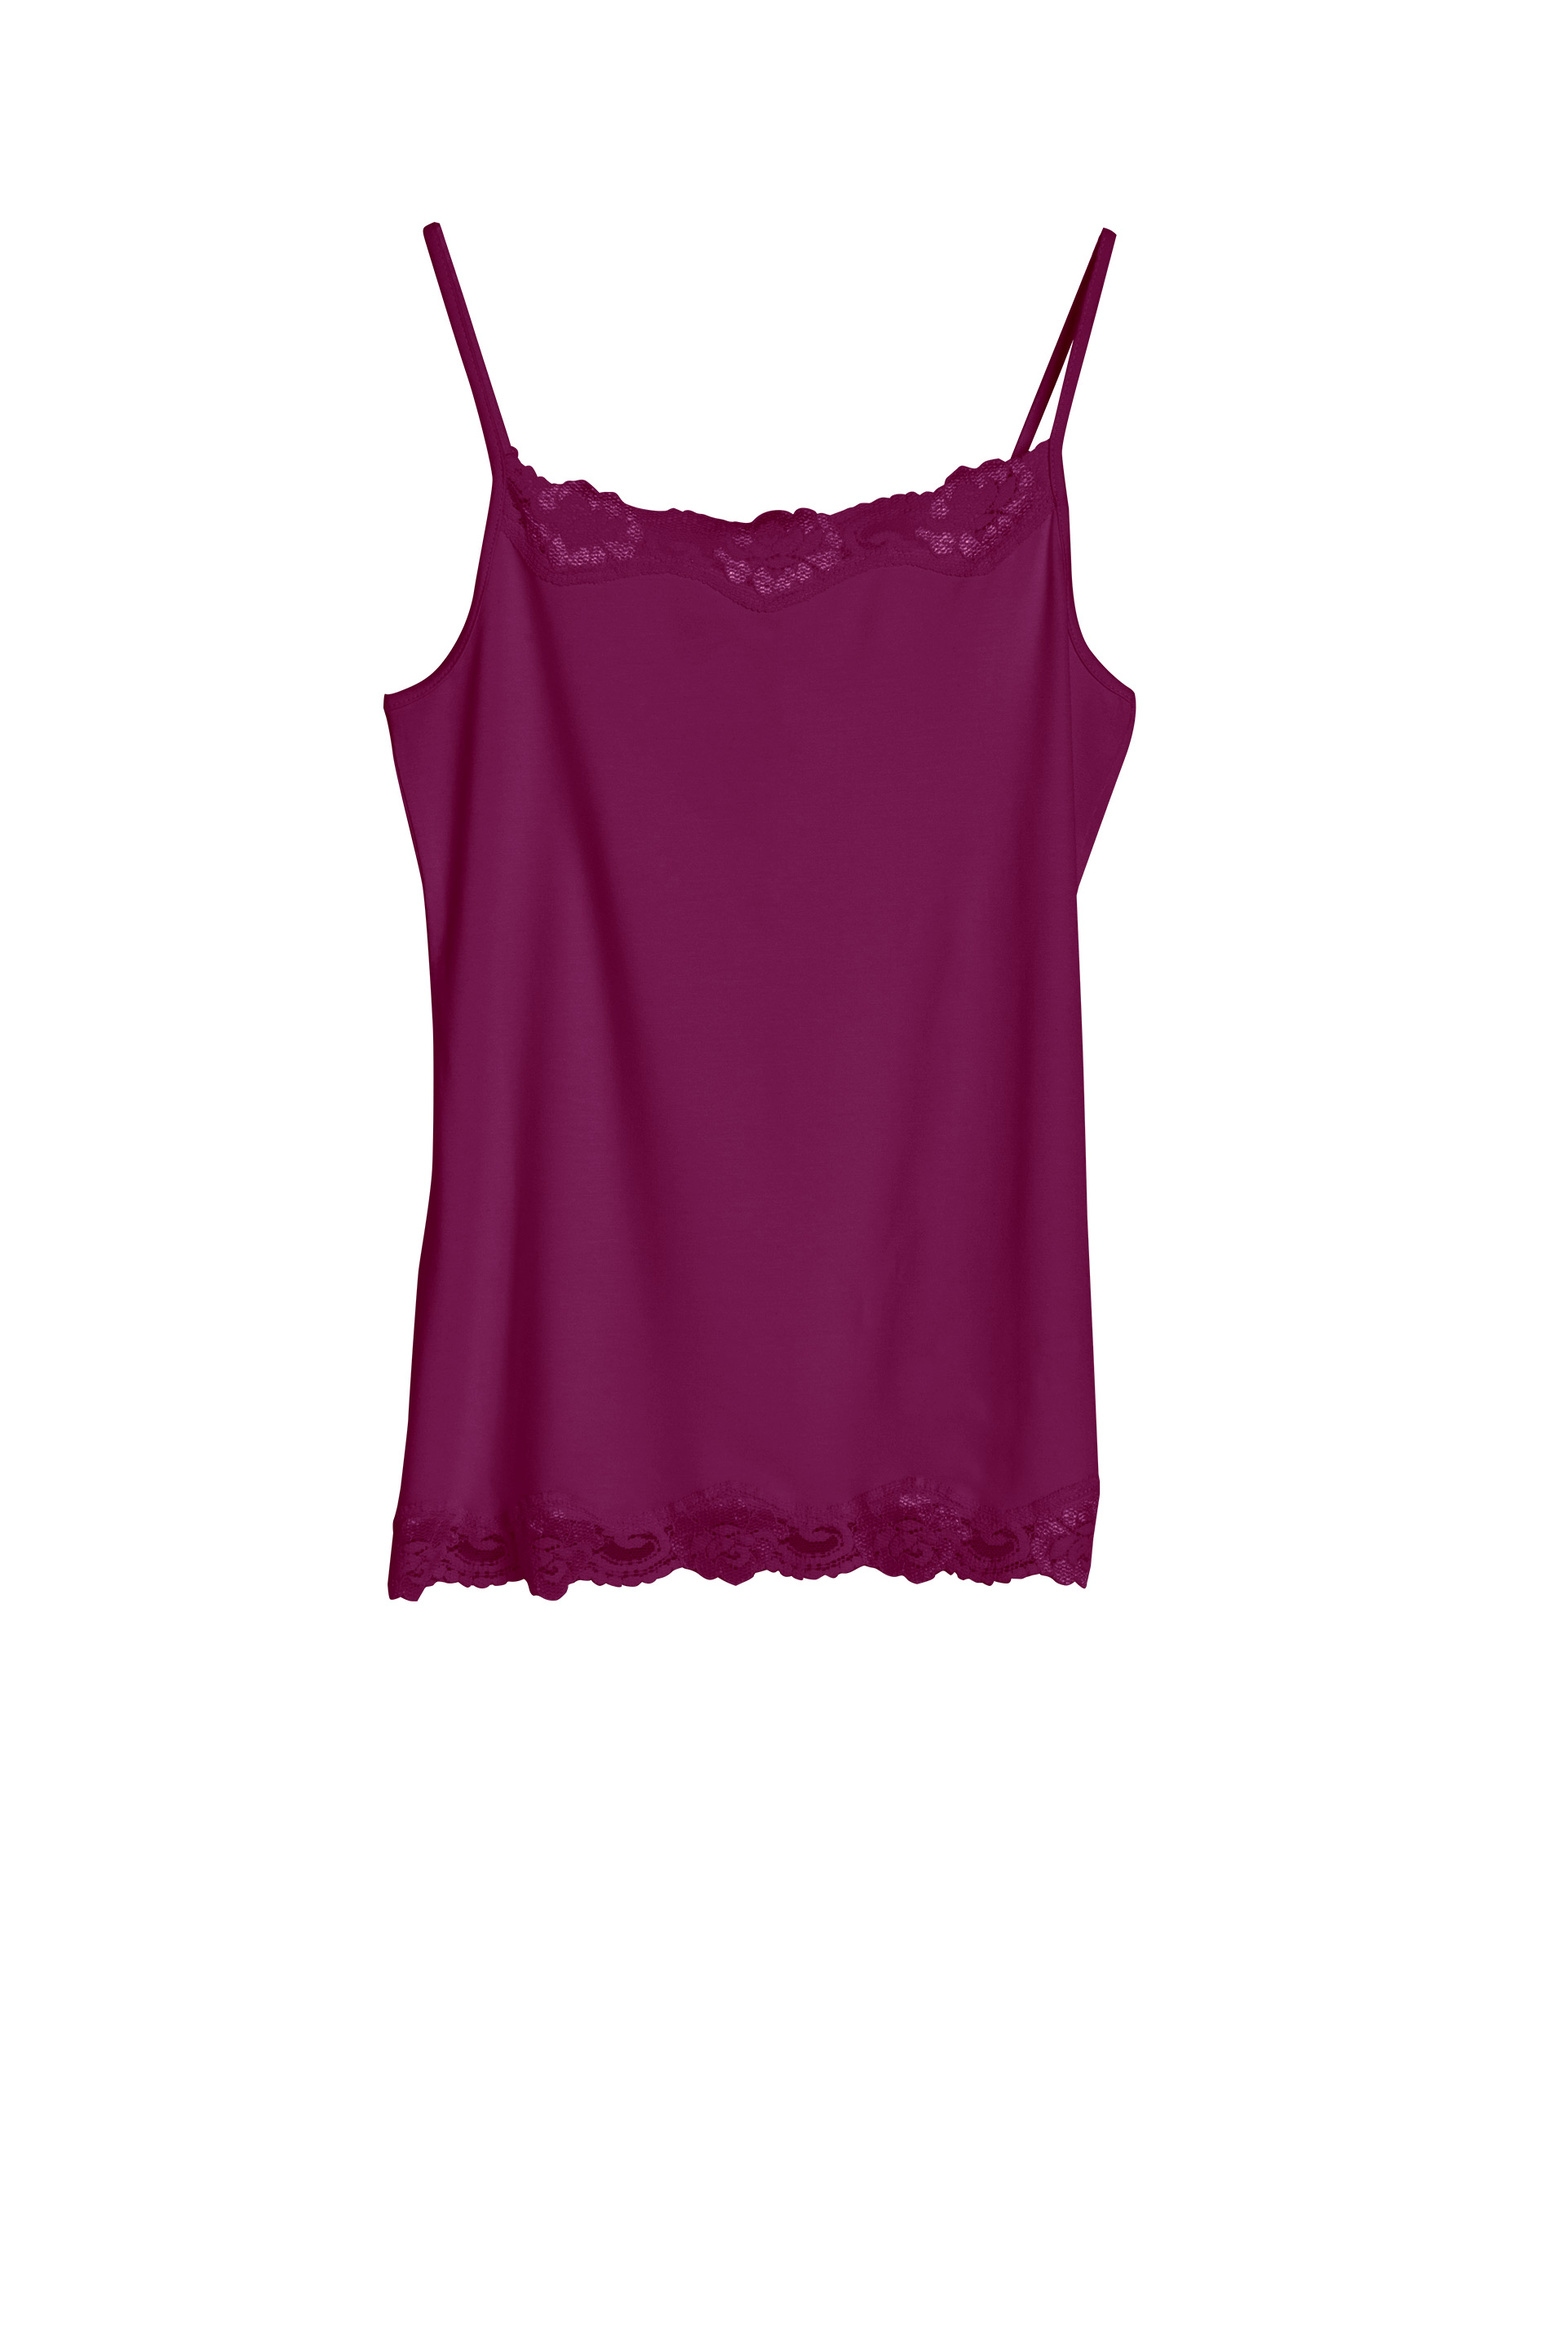 7200_lace_camisole_beetroot.jpg